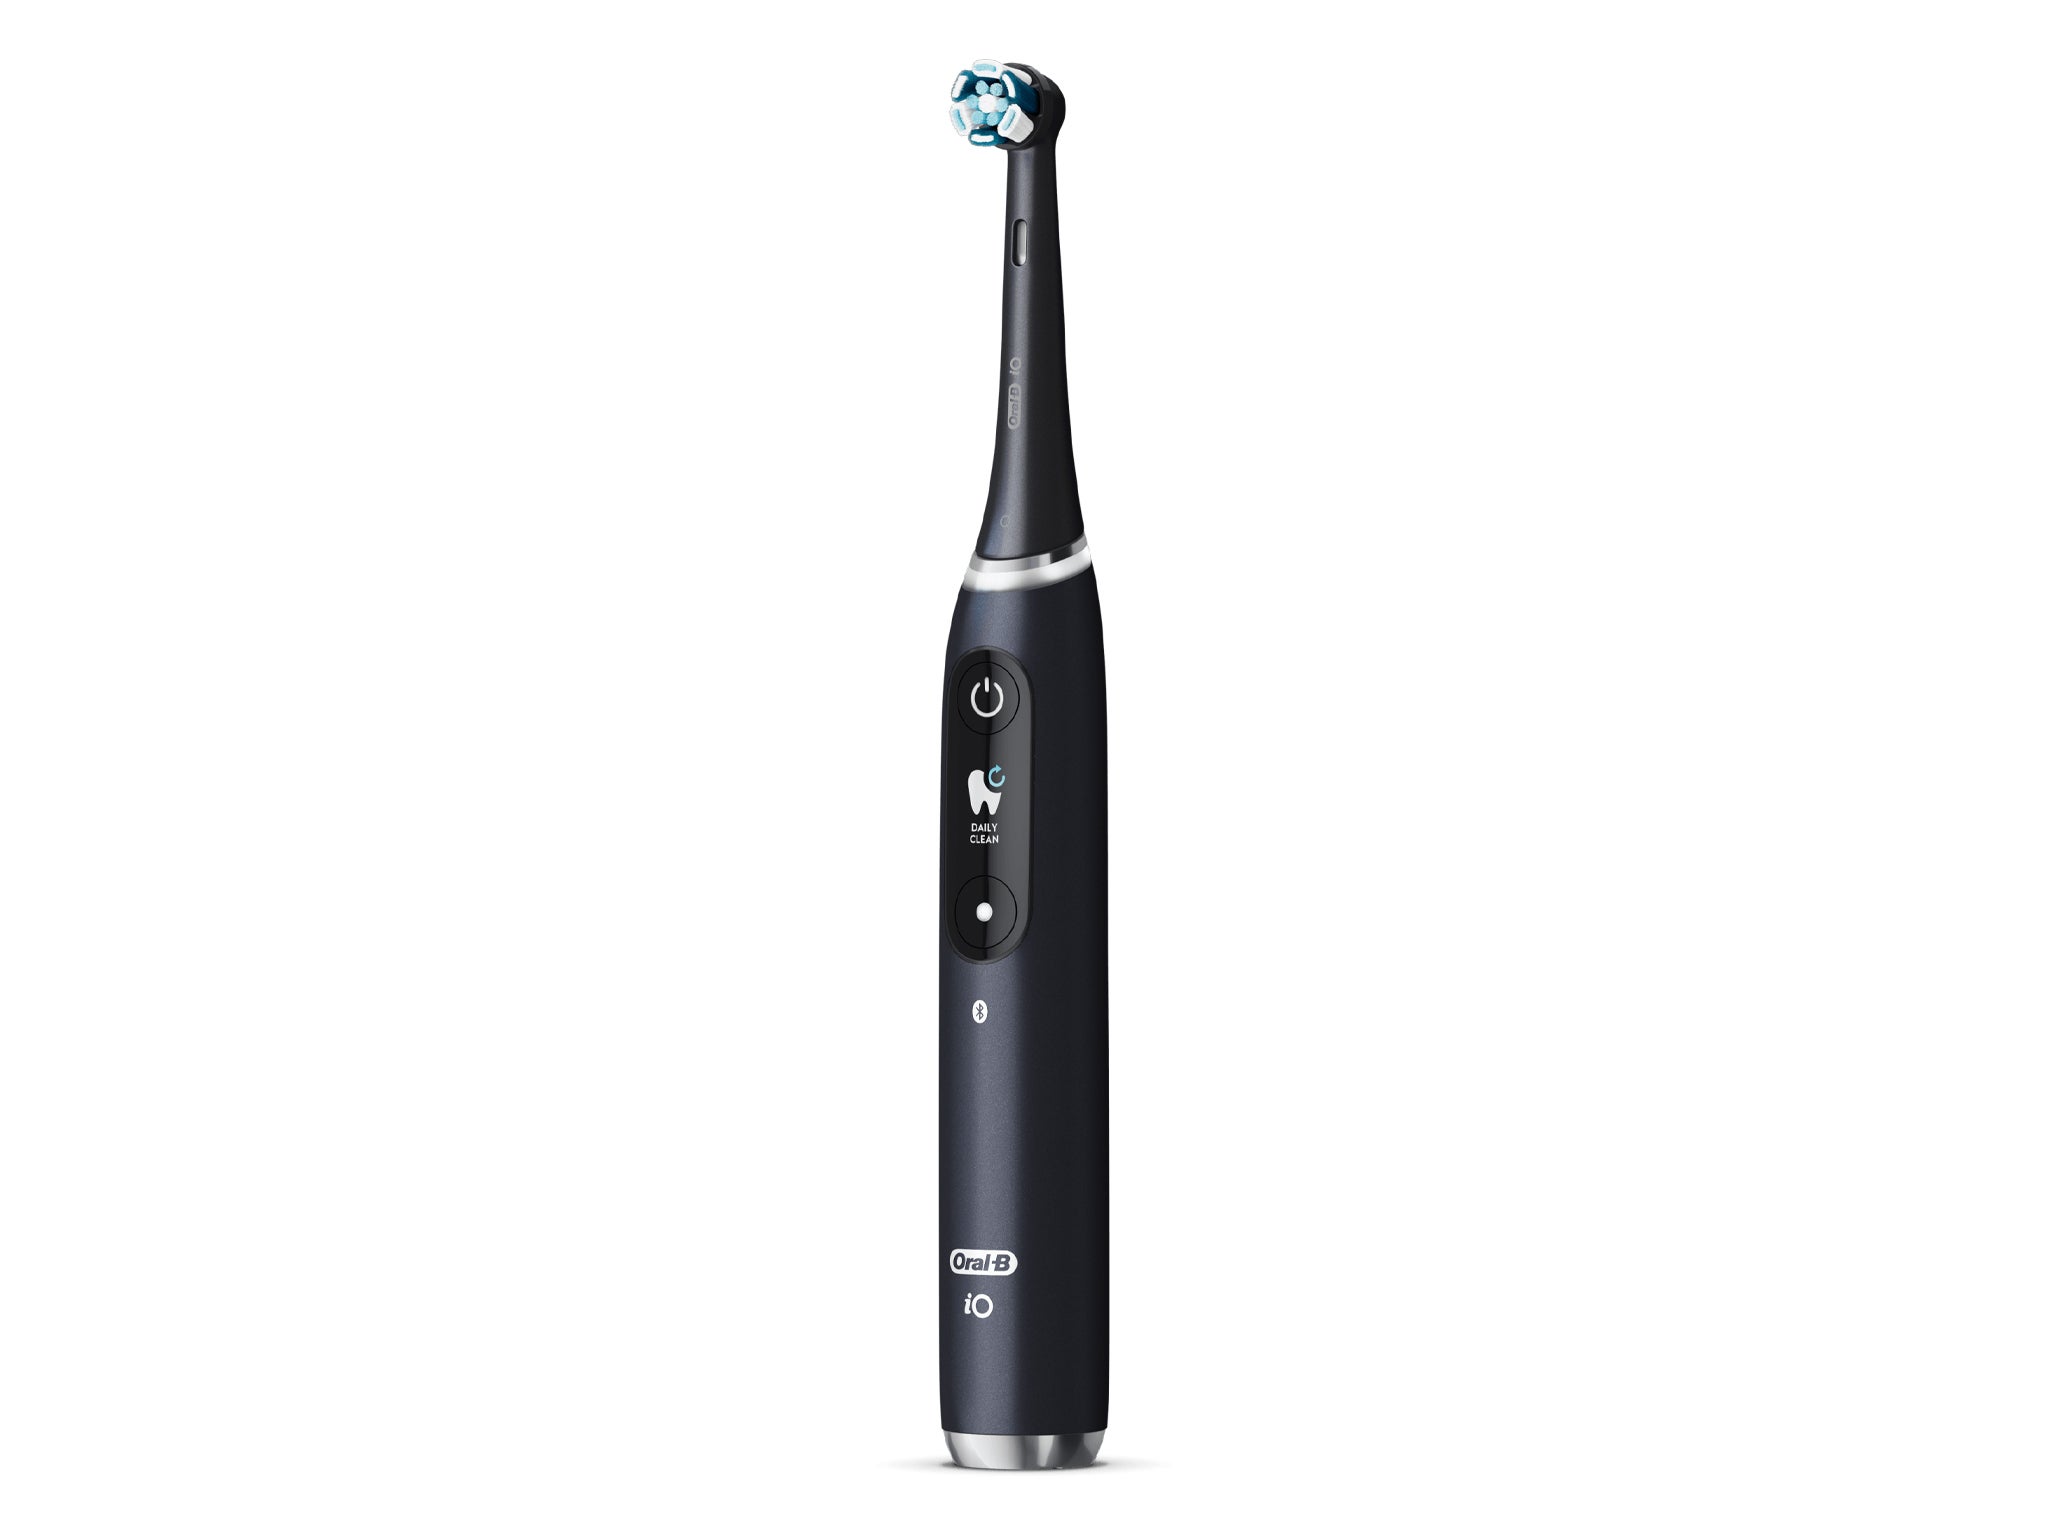 Oral-B iO9 electric toothbrush review: Does it deliver a superior